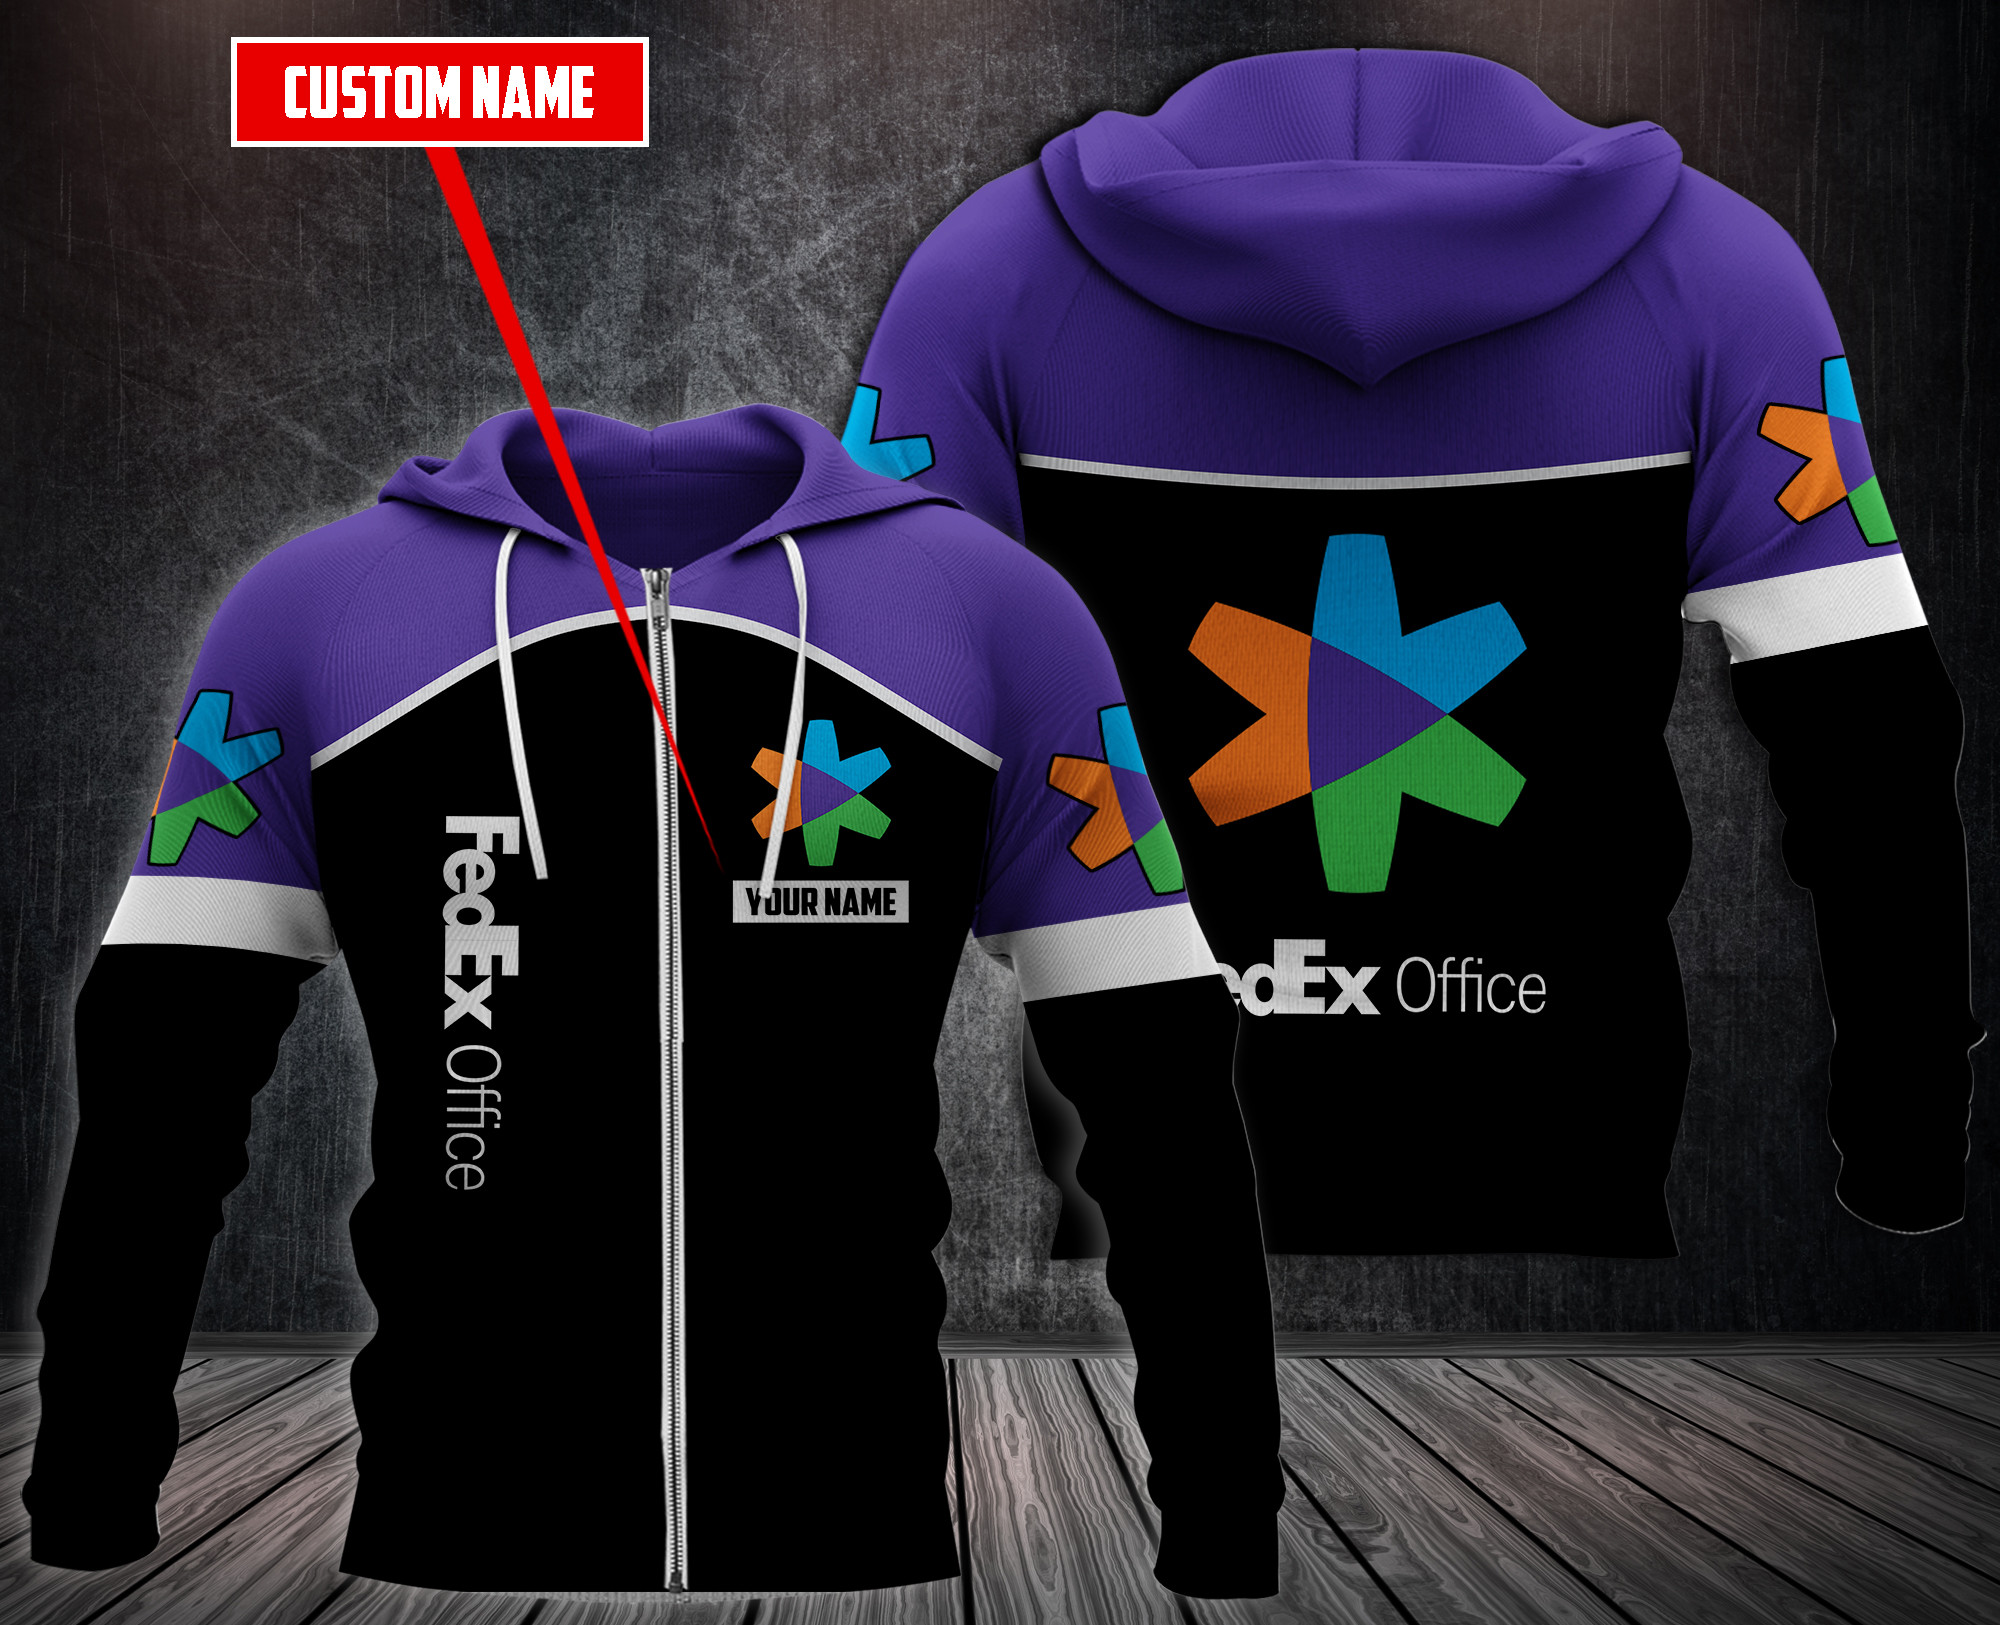 Choose the right hoodies for you on our boxboxshirt and ethershirt websites in 2022 84